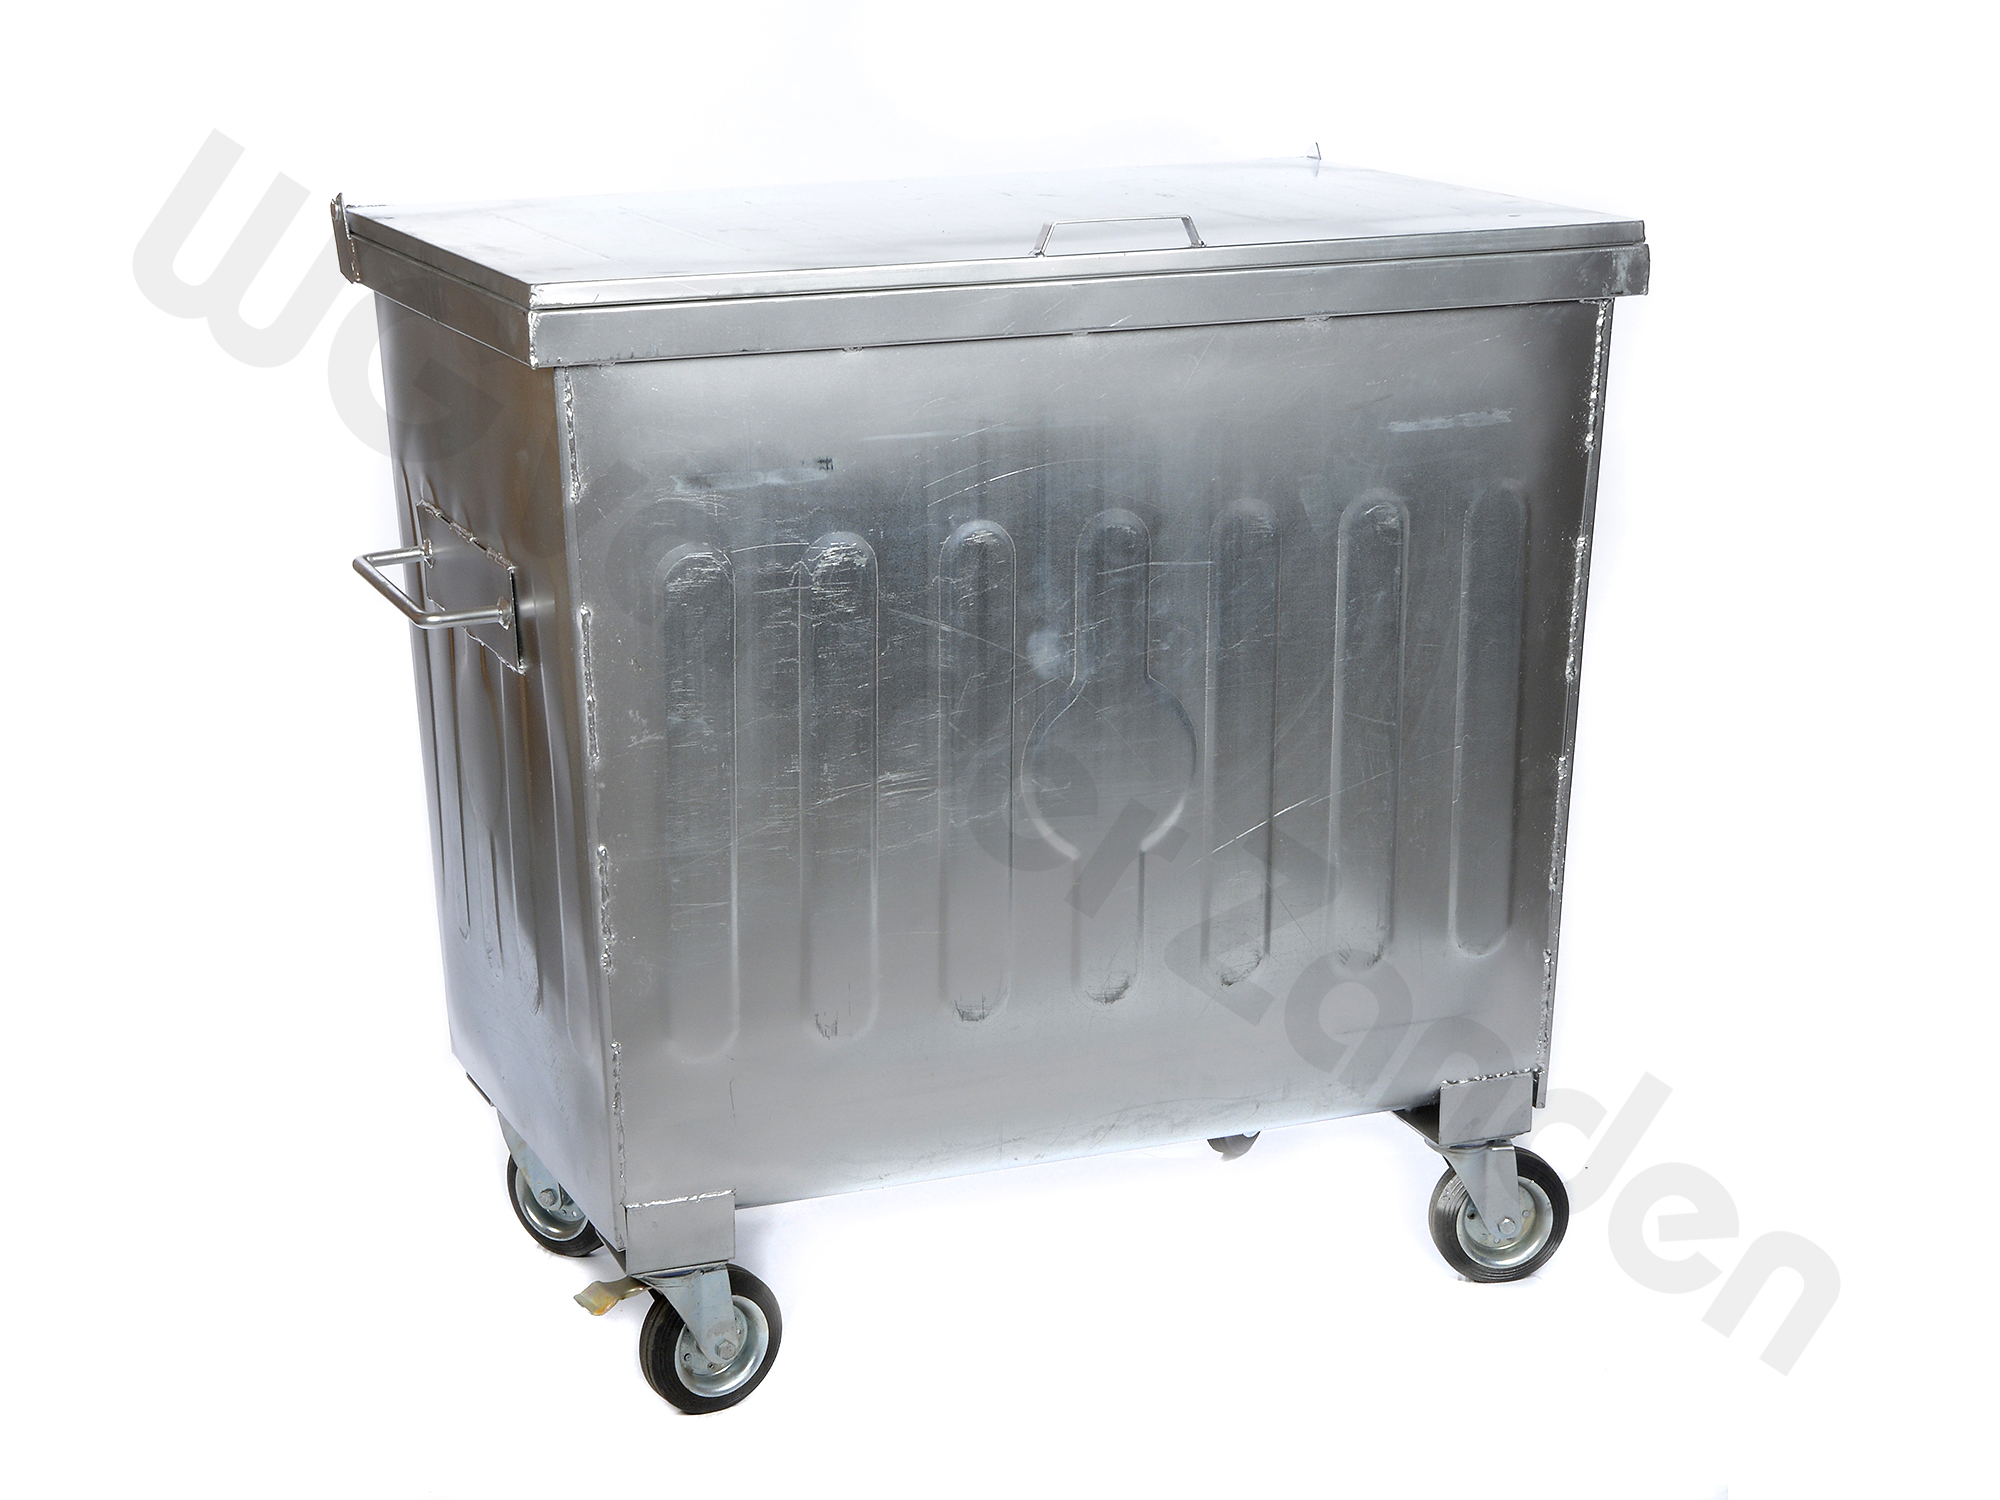 440455 GARBAGE CONTAINER 800 LTR GALV. STEEL WHEELED